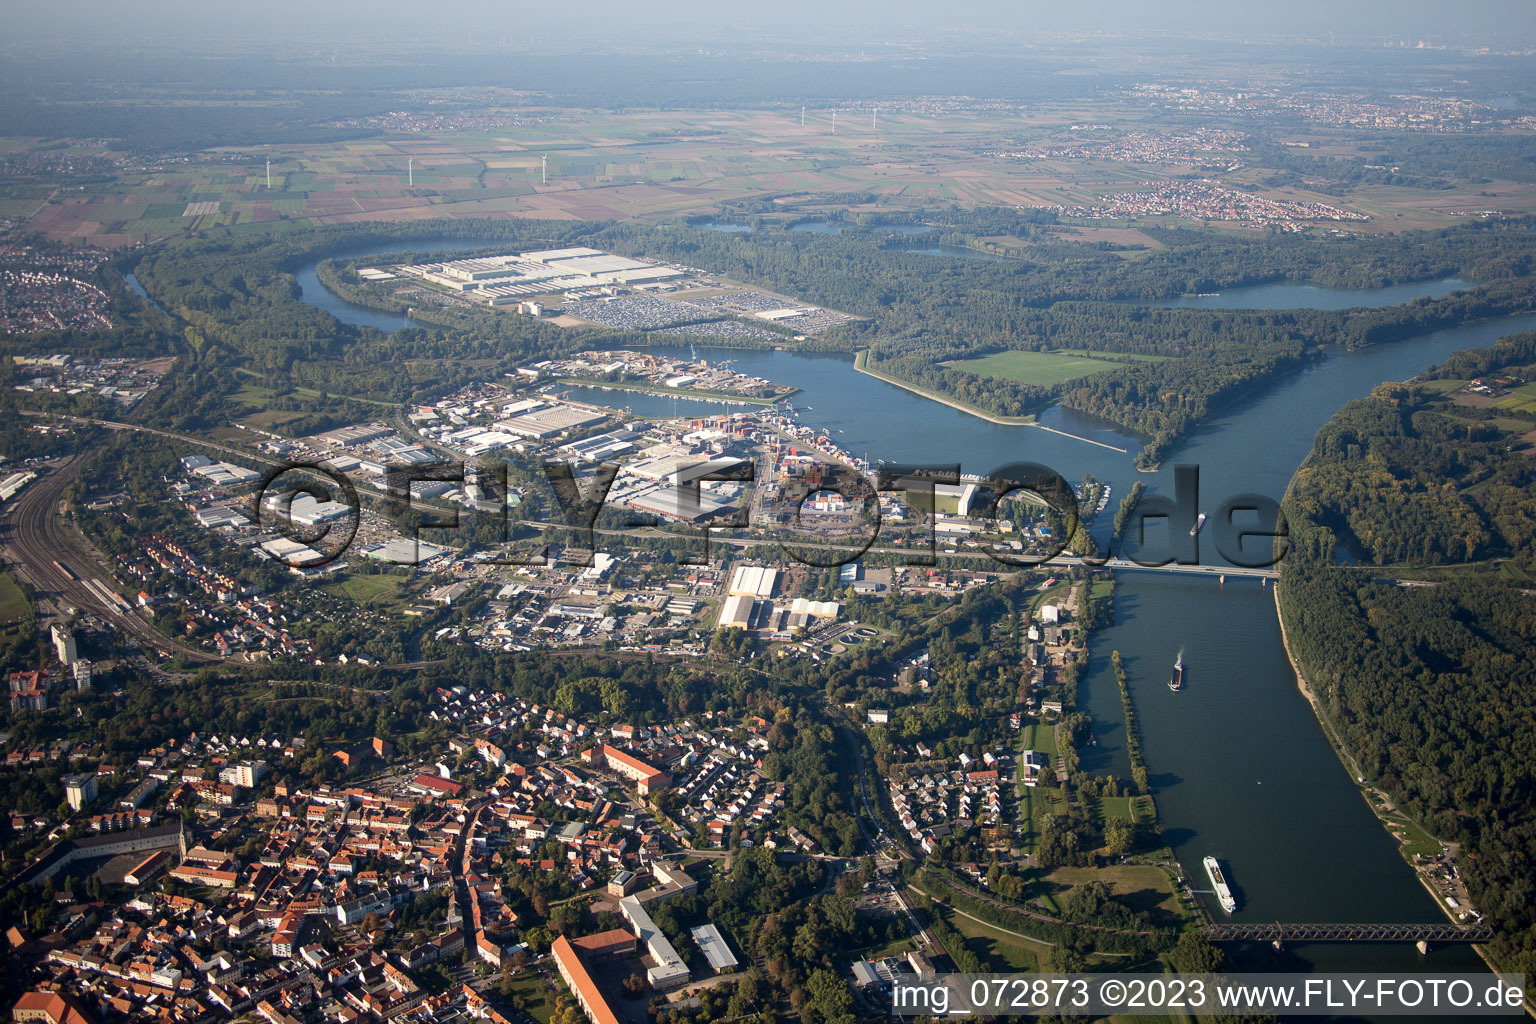 Germersheim in the state Rhineland-Palatinate, Germany seen from above